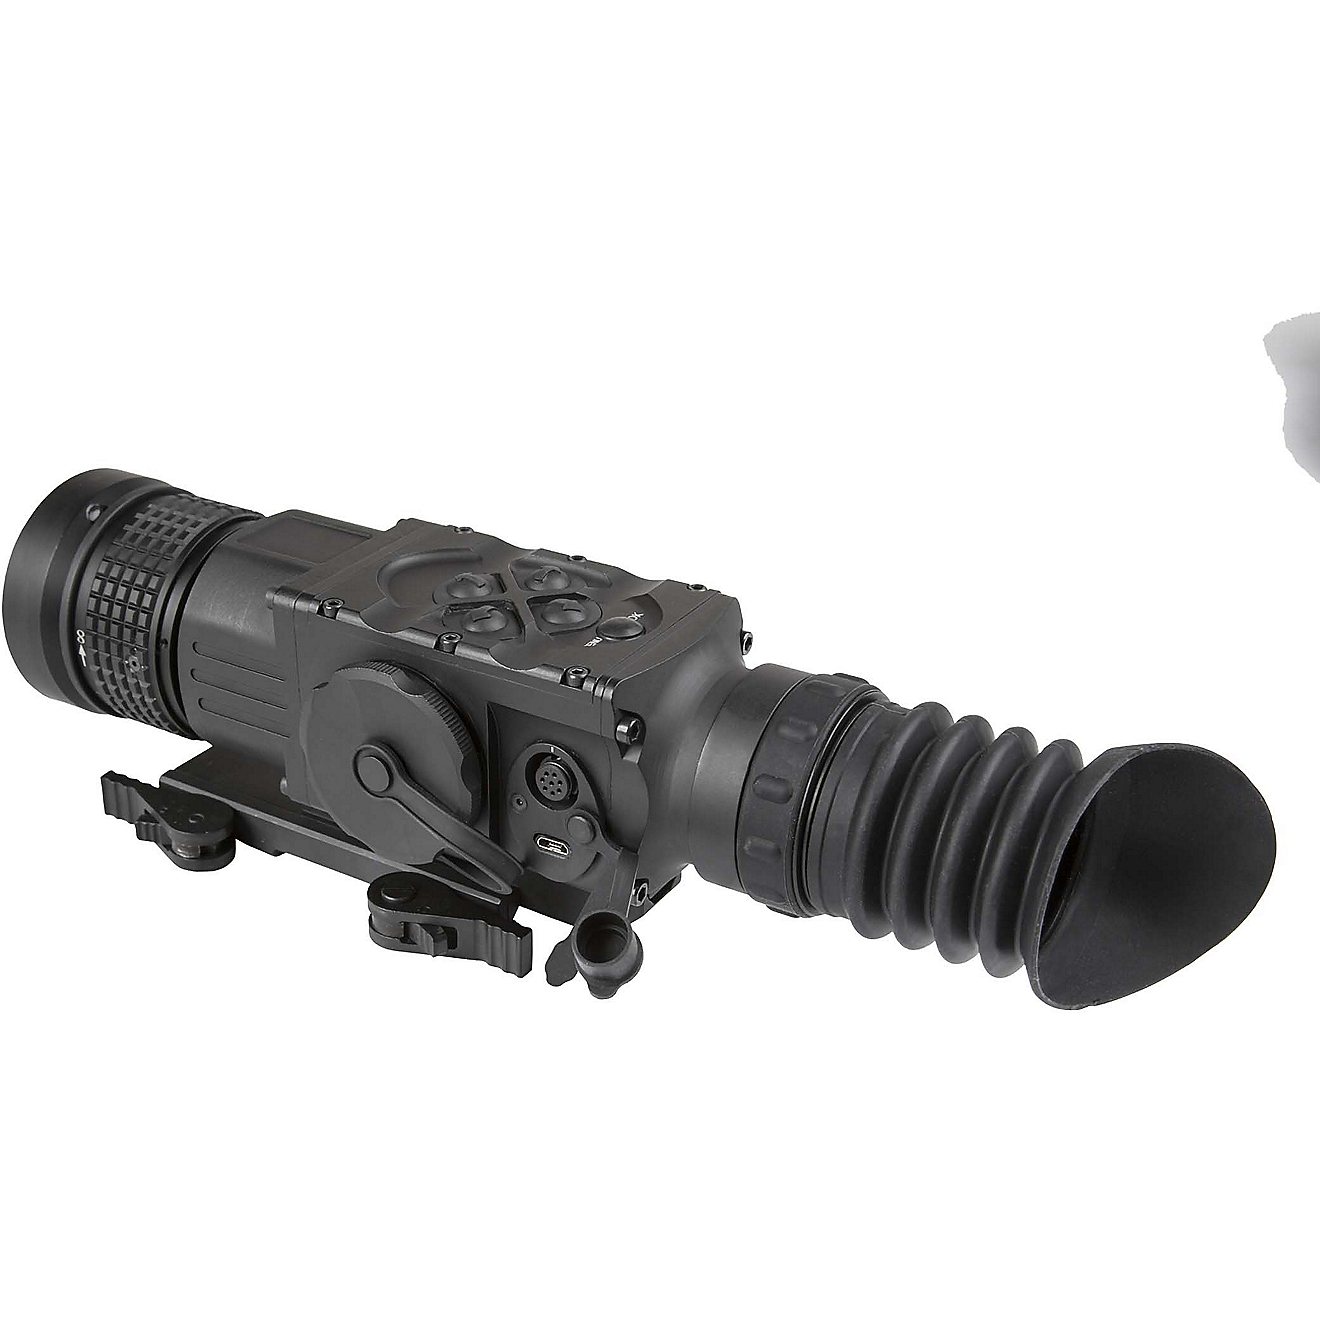 AGM Global Vision Python TS50-640 2 x 50 Thermal Imaging Riflescope                                                              - view number 4